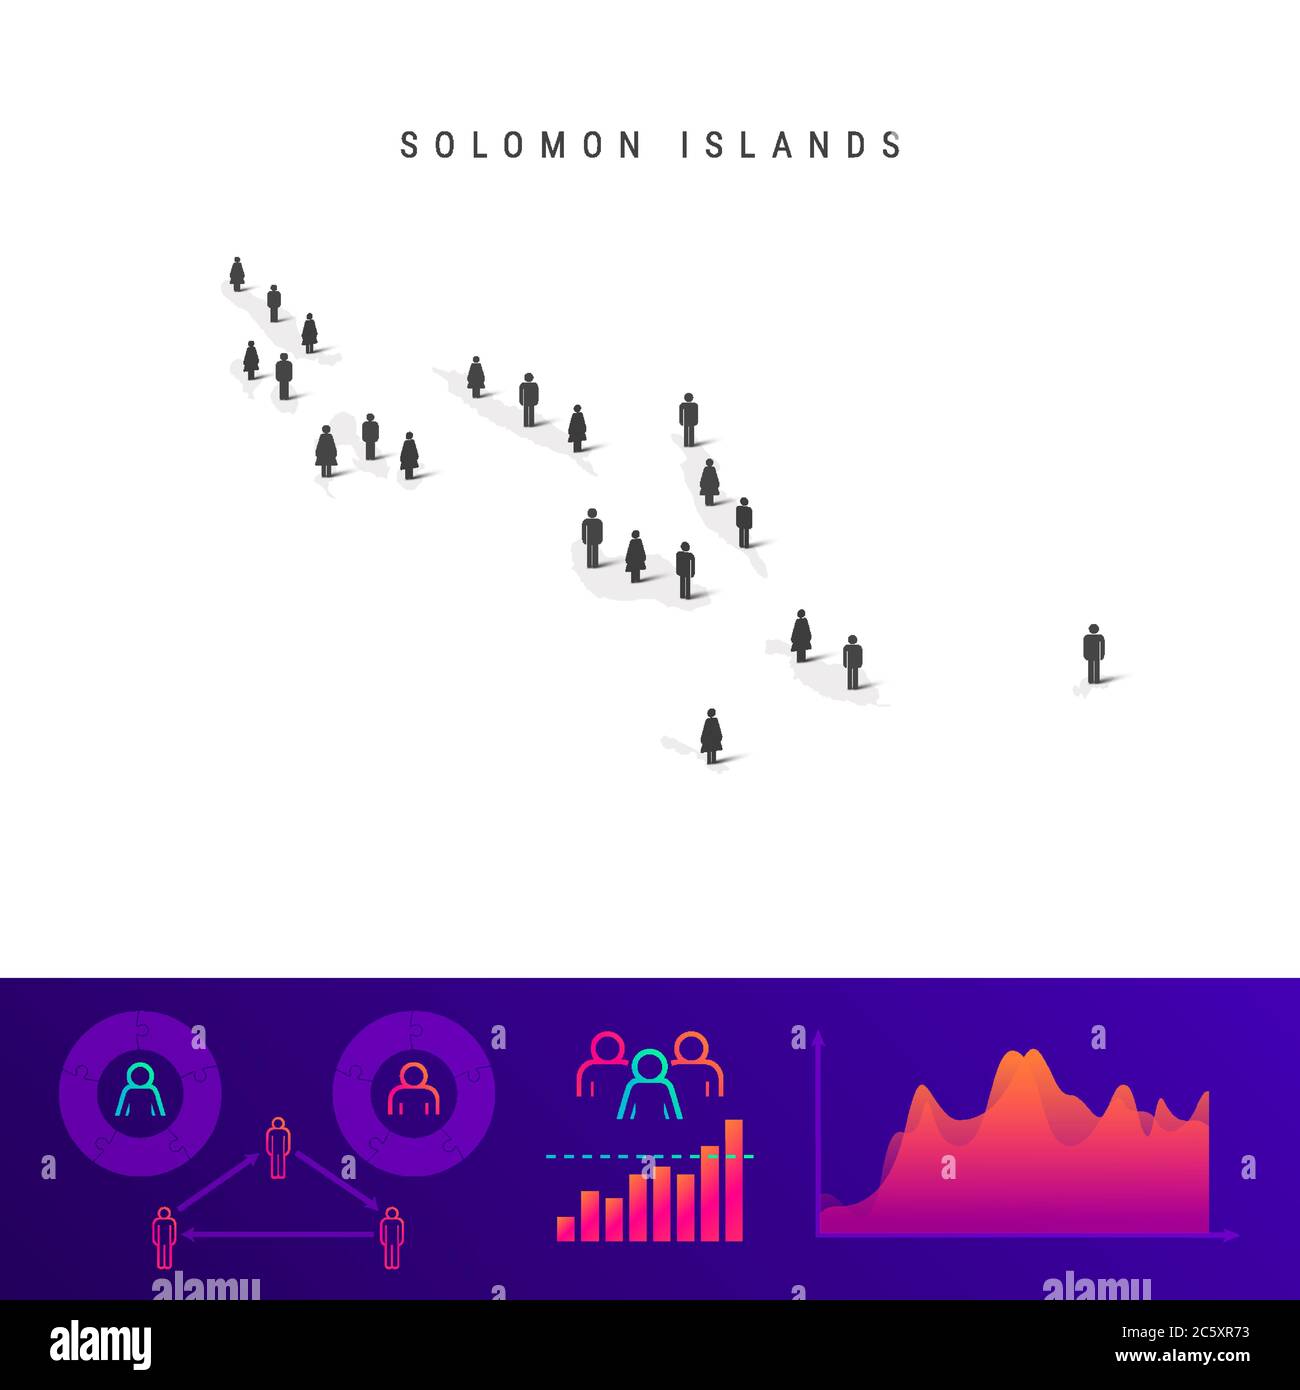 Solomon Islands people map. Detailed vector silhouette. Mixed crowd of men and women icons. Population infographic elements. Vector illustration isola Stock Vector